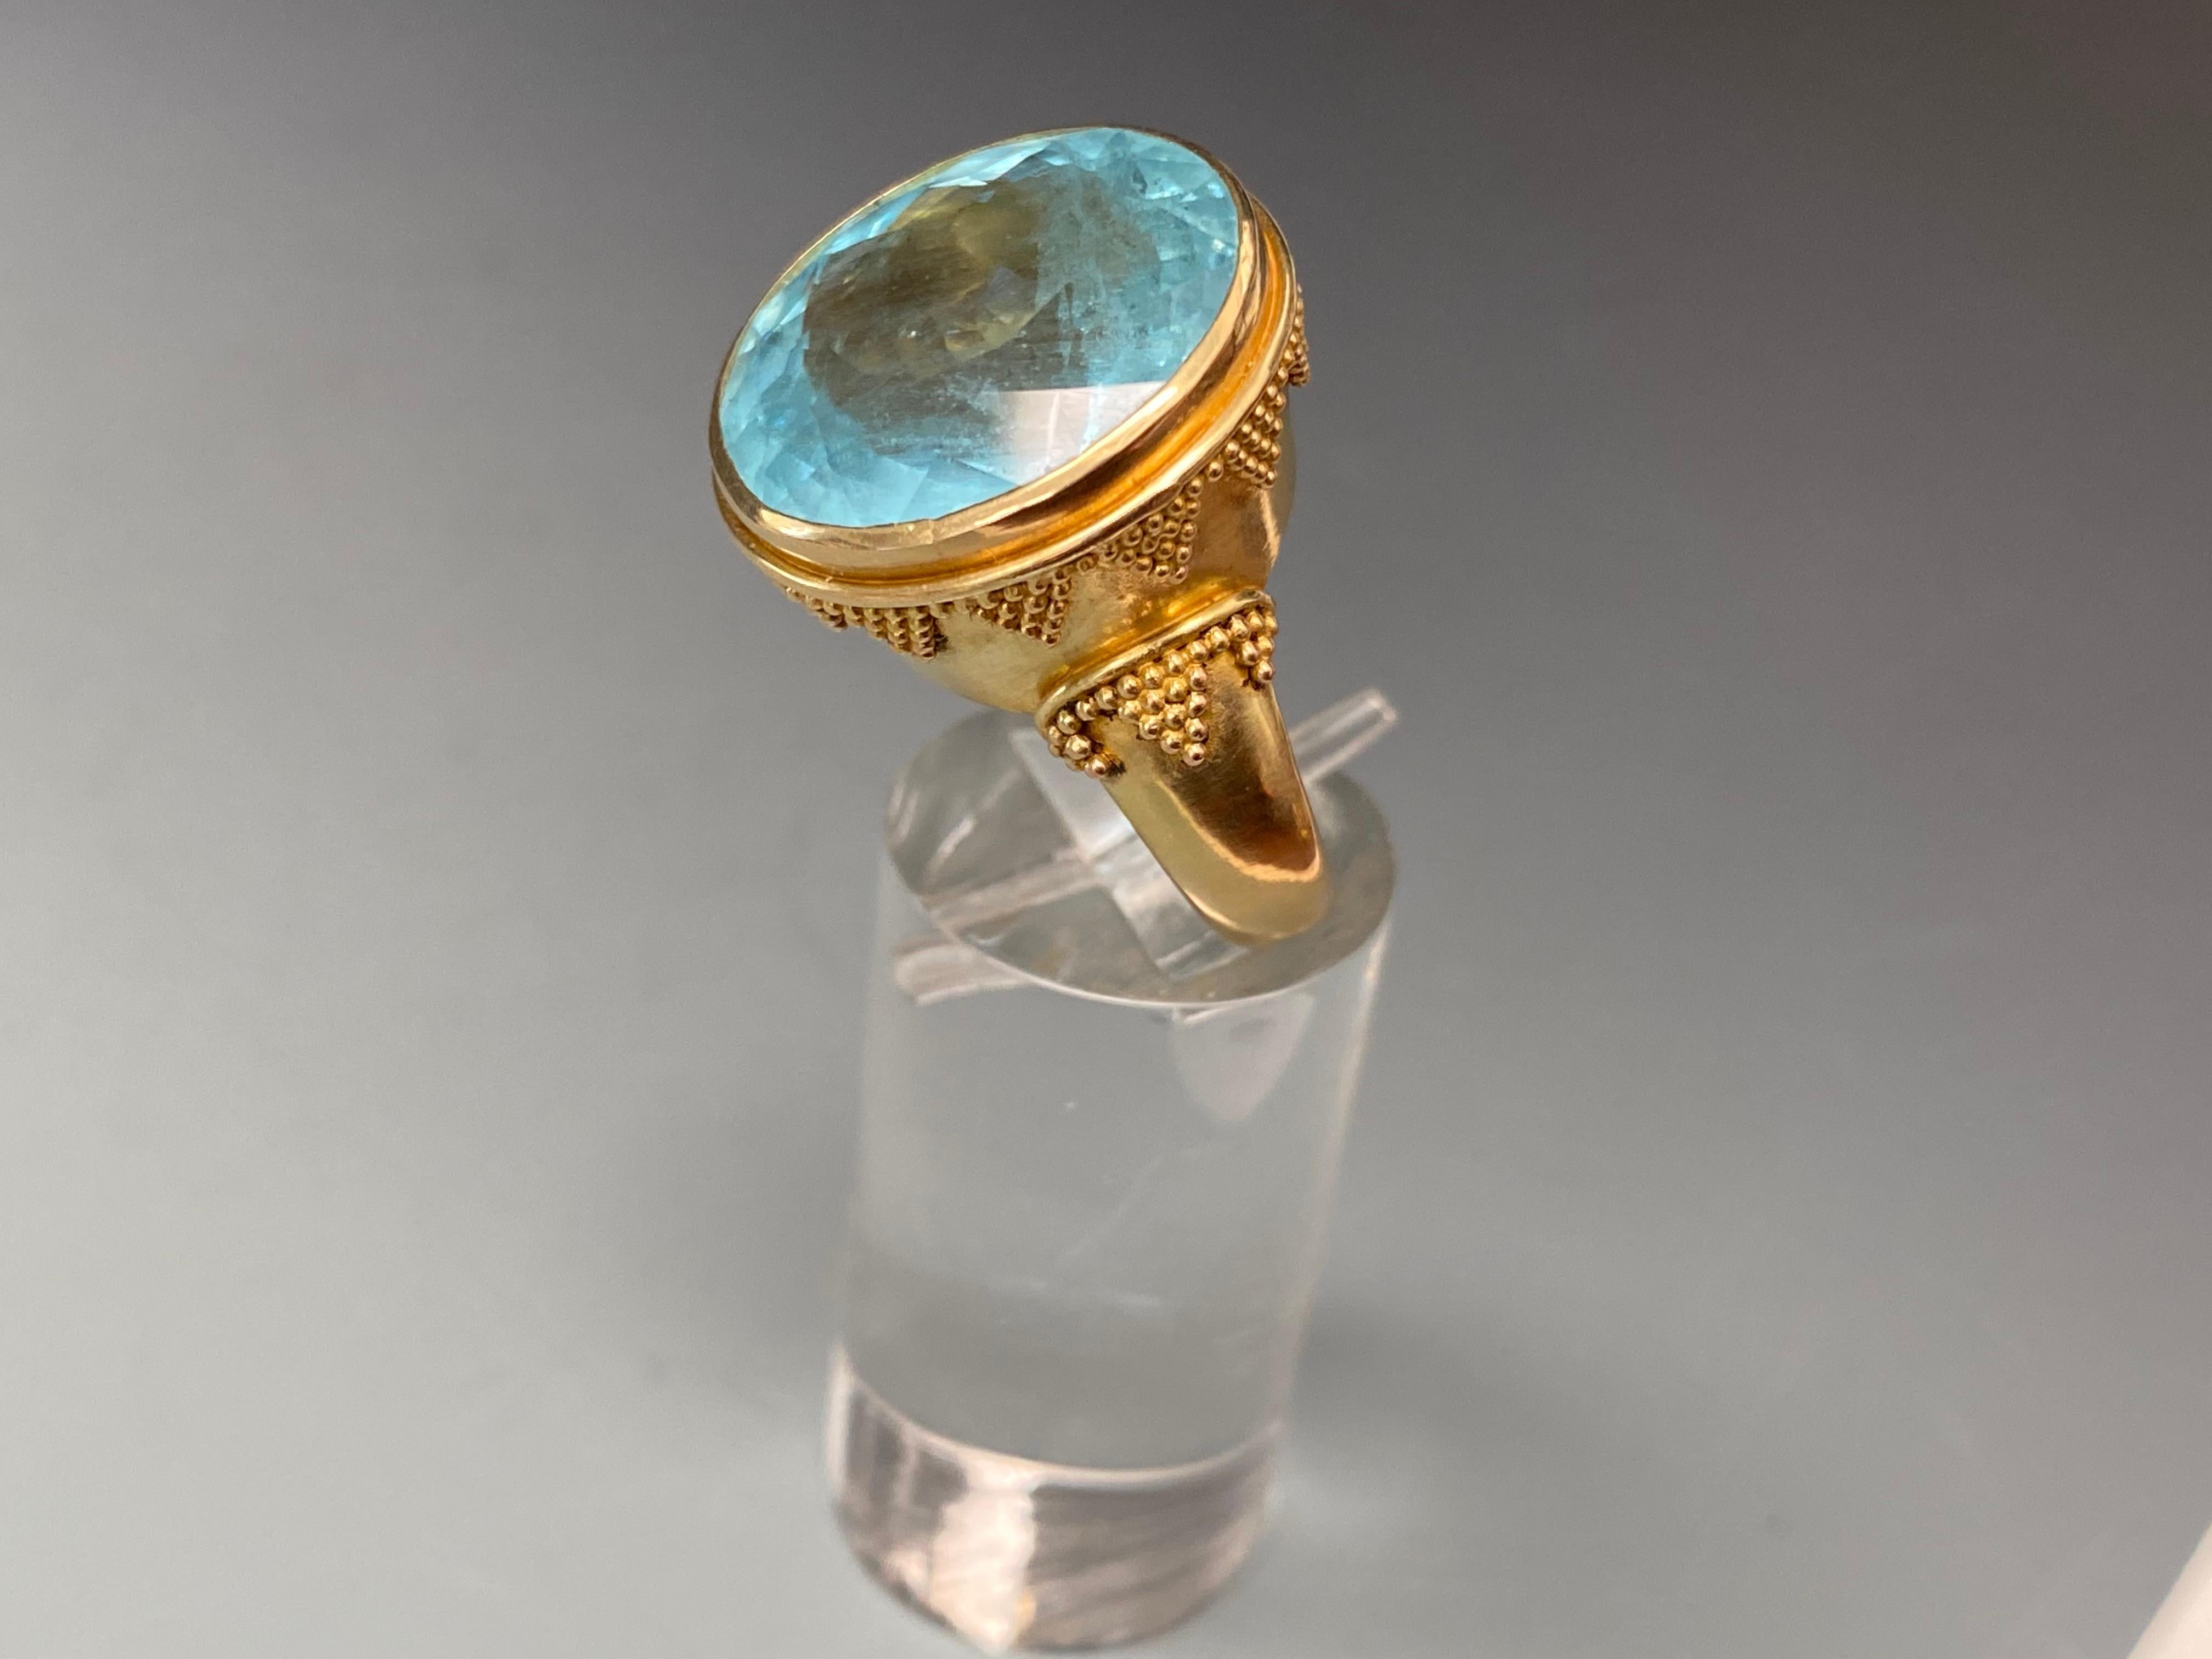 A beautiful round faceted Brazilian aquamarine is held in a 